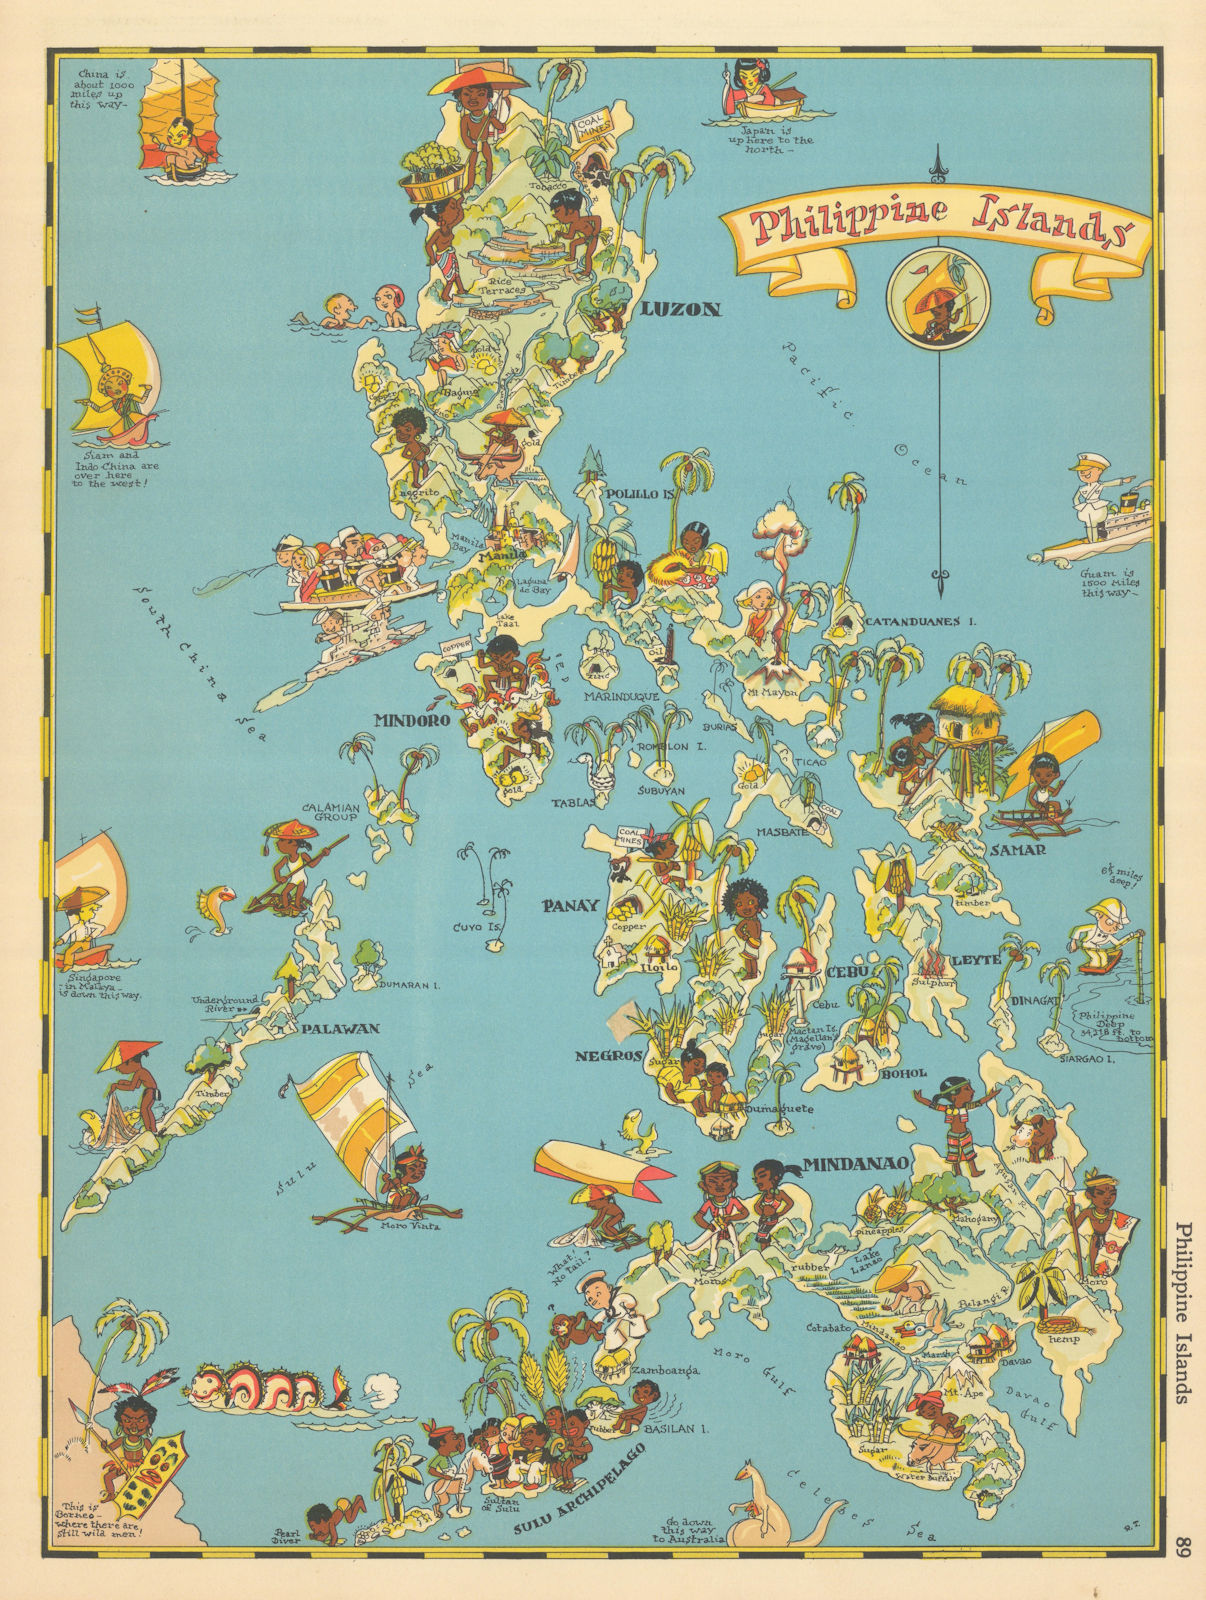 Philippine Islands. Pictorial map by Ruth Taylor White 1935 old vintage